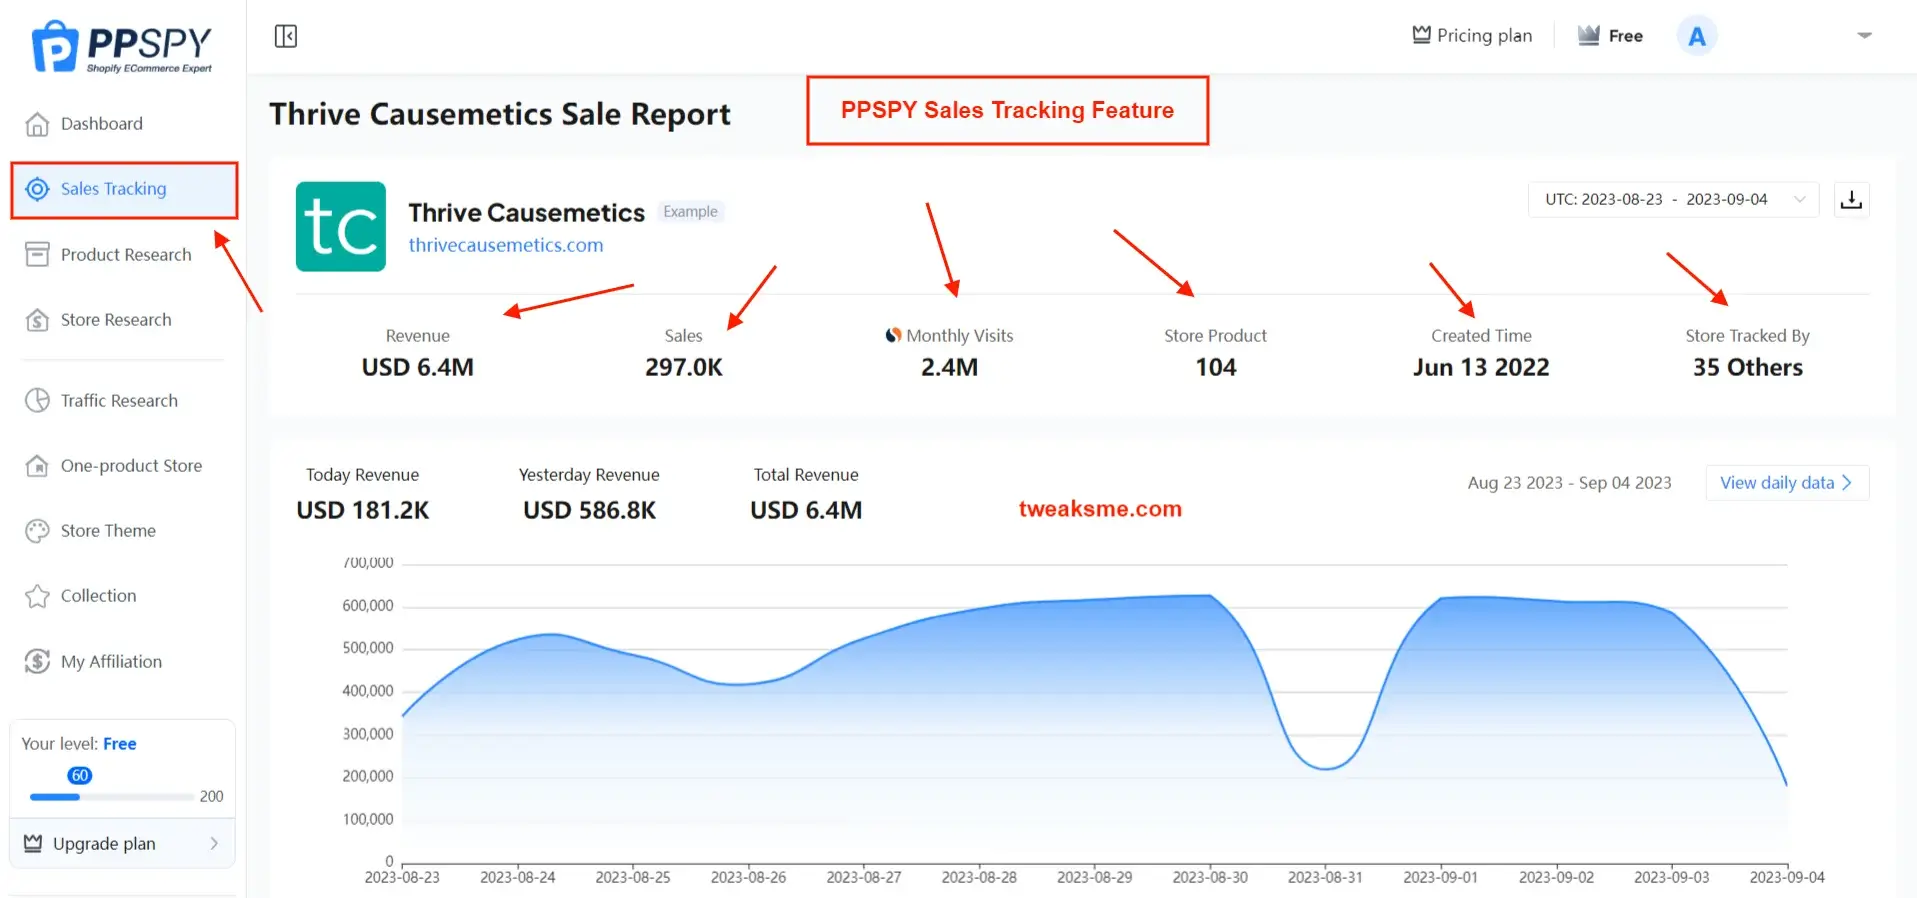 PPSPY Sales Tracking Feature